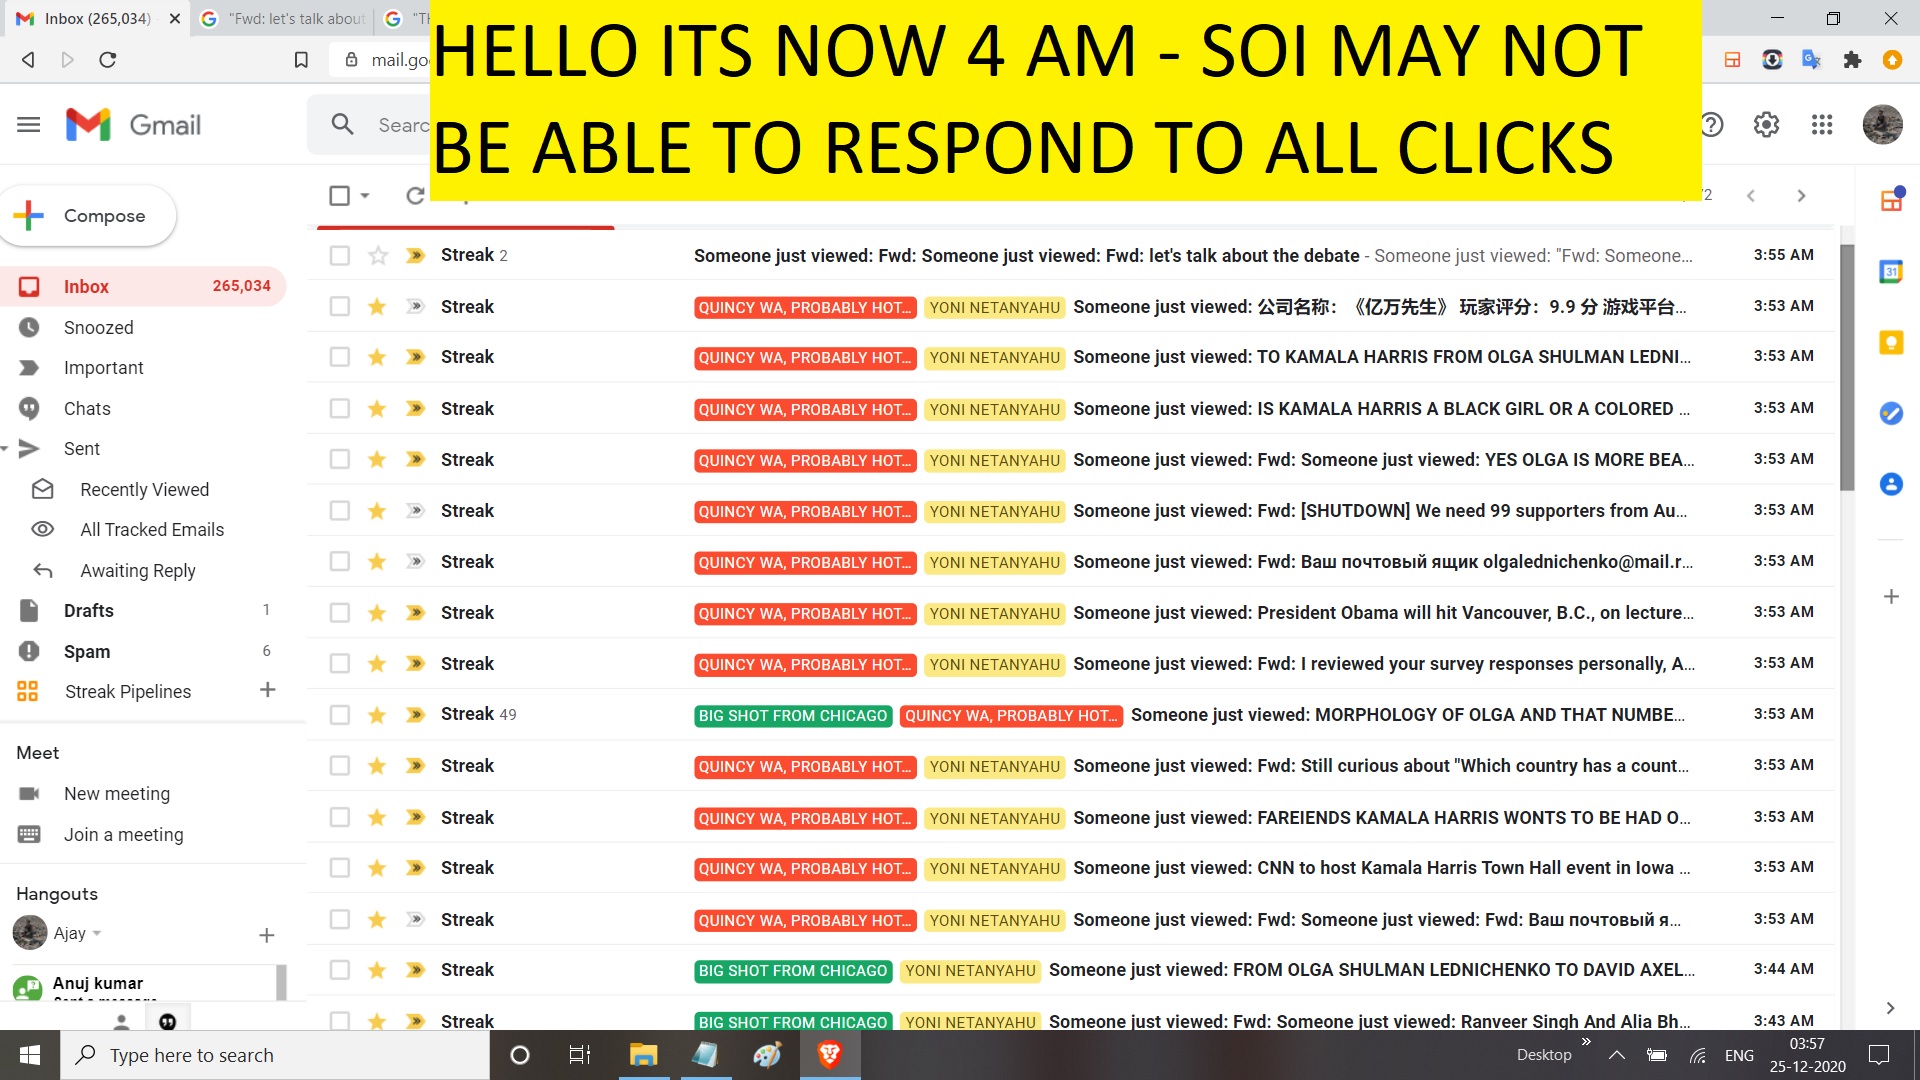 HELLO ITS NOW 4 AM - SOI MAY NOT BE ABLE TO RESPOND TO ALL CLICKS